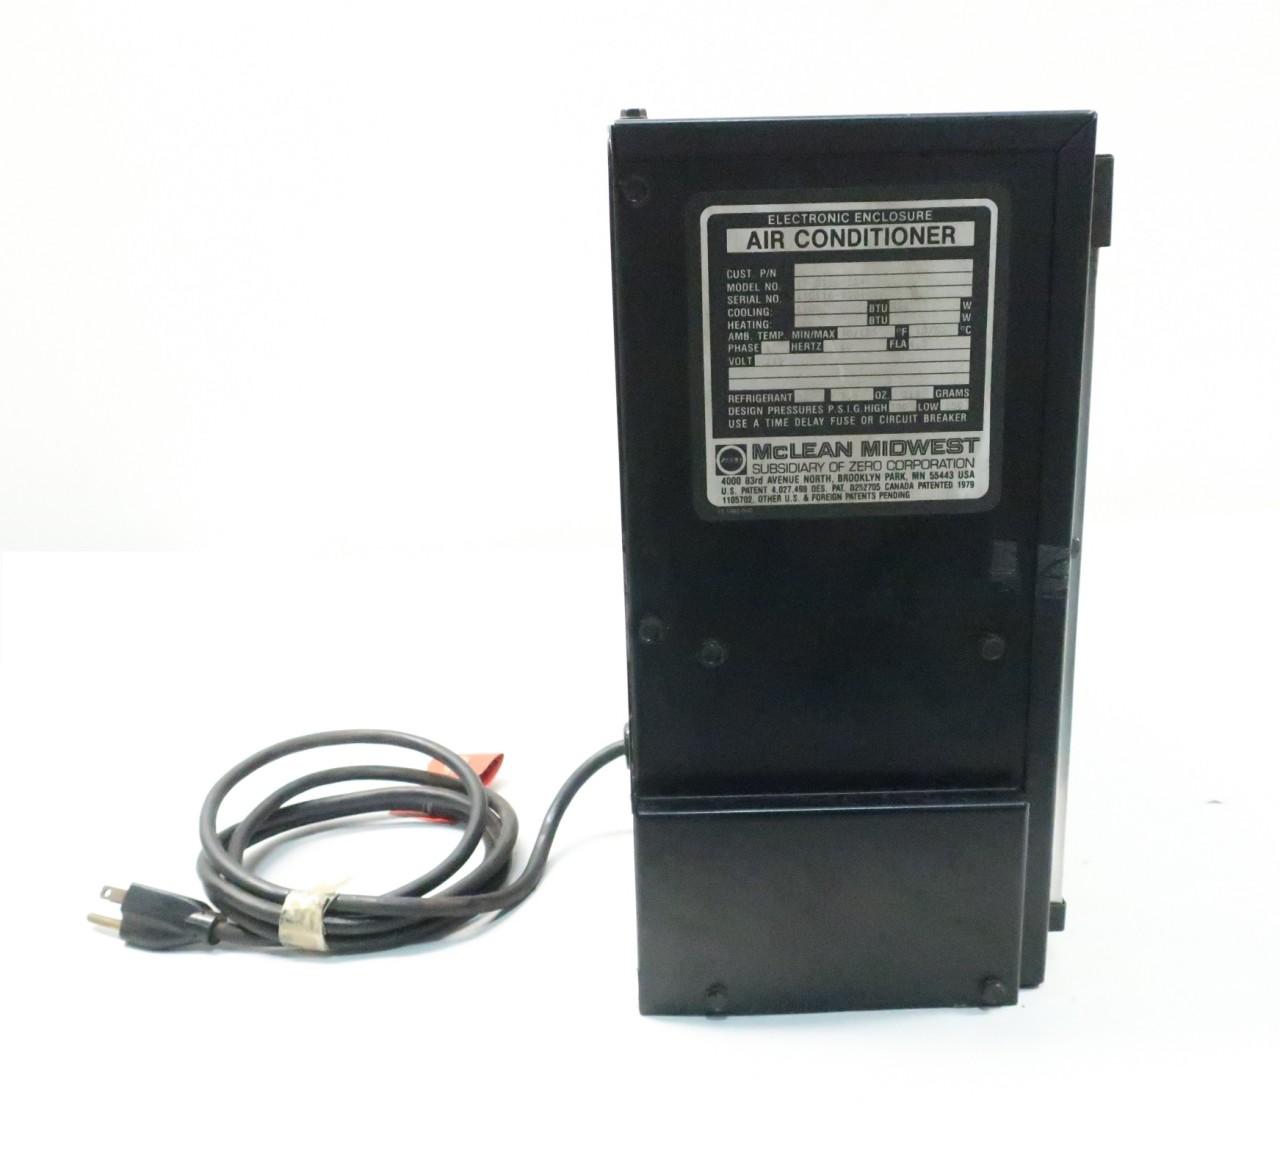 13-0116-002 1200 BTU Cooling Details about   Electronic Enclosure Air Conditioner Model # 